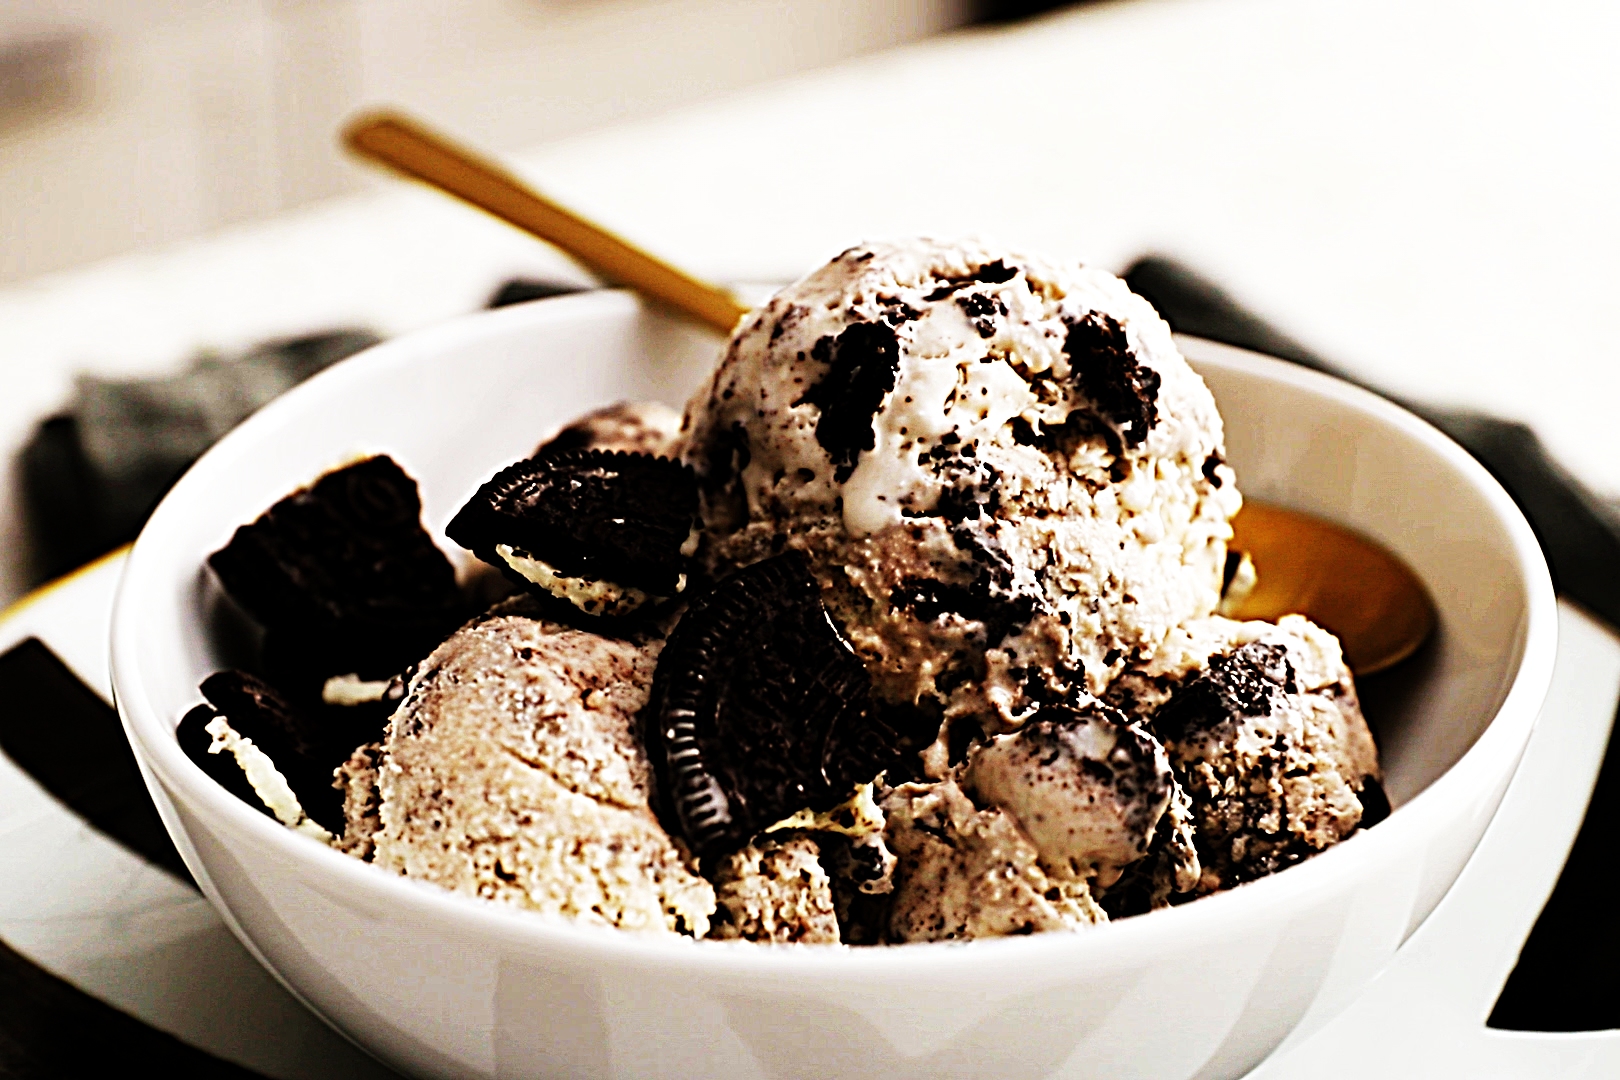 Stupid-Easy Recipe for No-Cook Cookies and Cream Ice Cream (#1 Top-Rated)